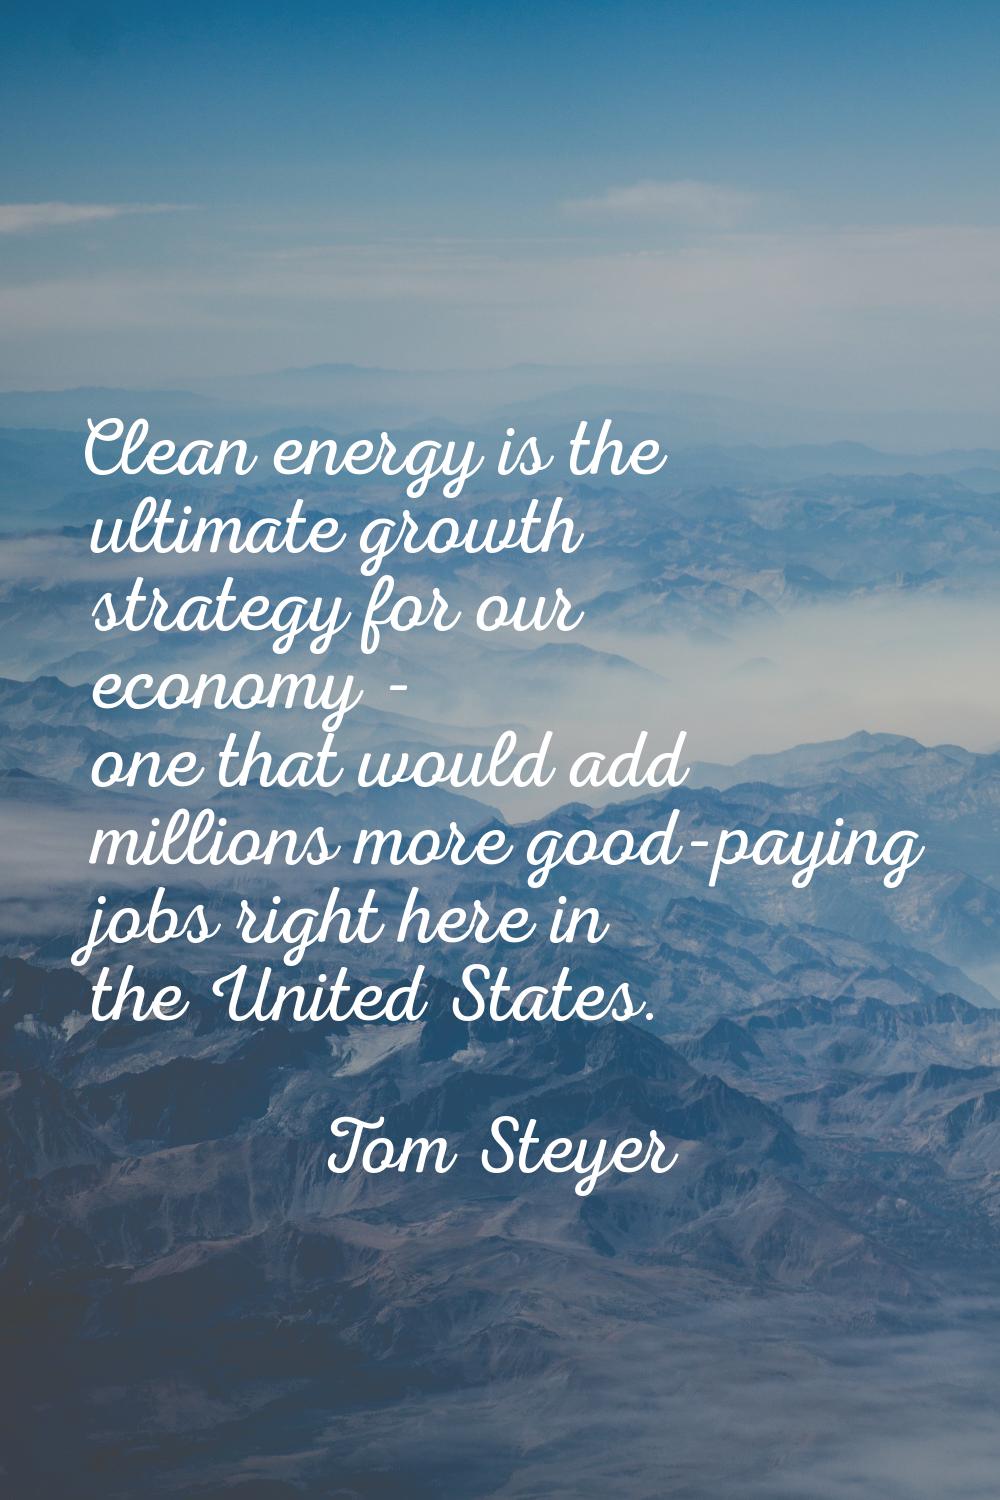 Clean energy is the ultimate growth strategy for our economy - one that would add millions more goo